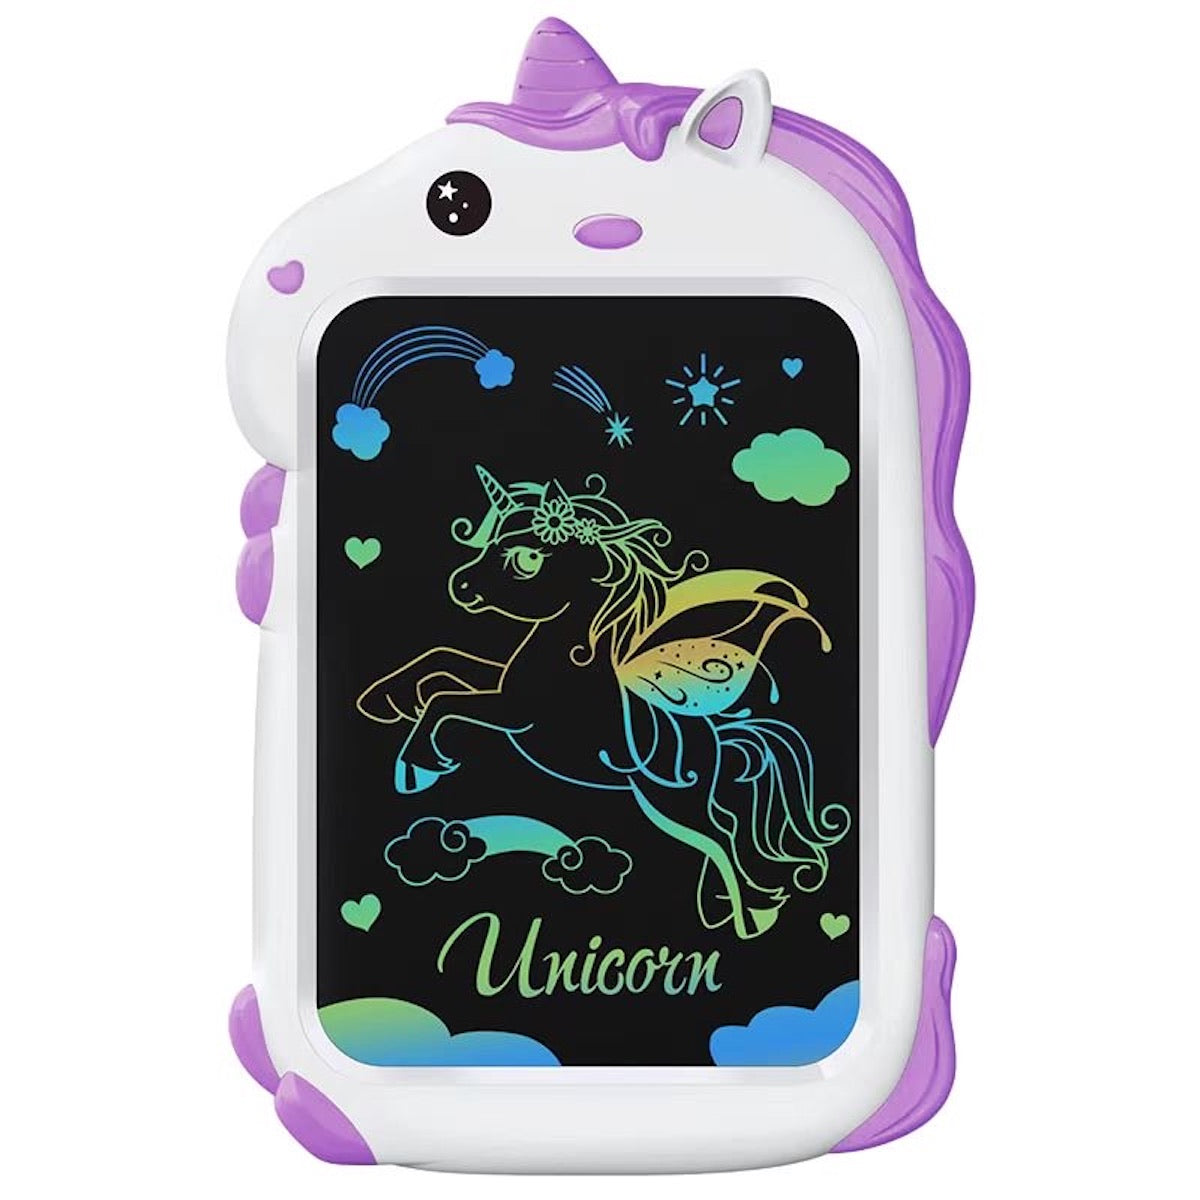 ANANK LCD Pad Arts & Drawing Tablet Gift For Kids Drawing Electronic Writing Board With Stylus Cartoon Little Unicorn